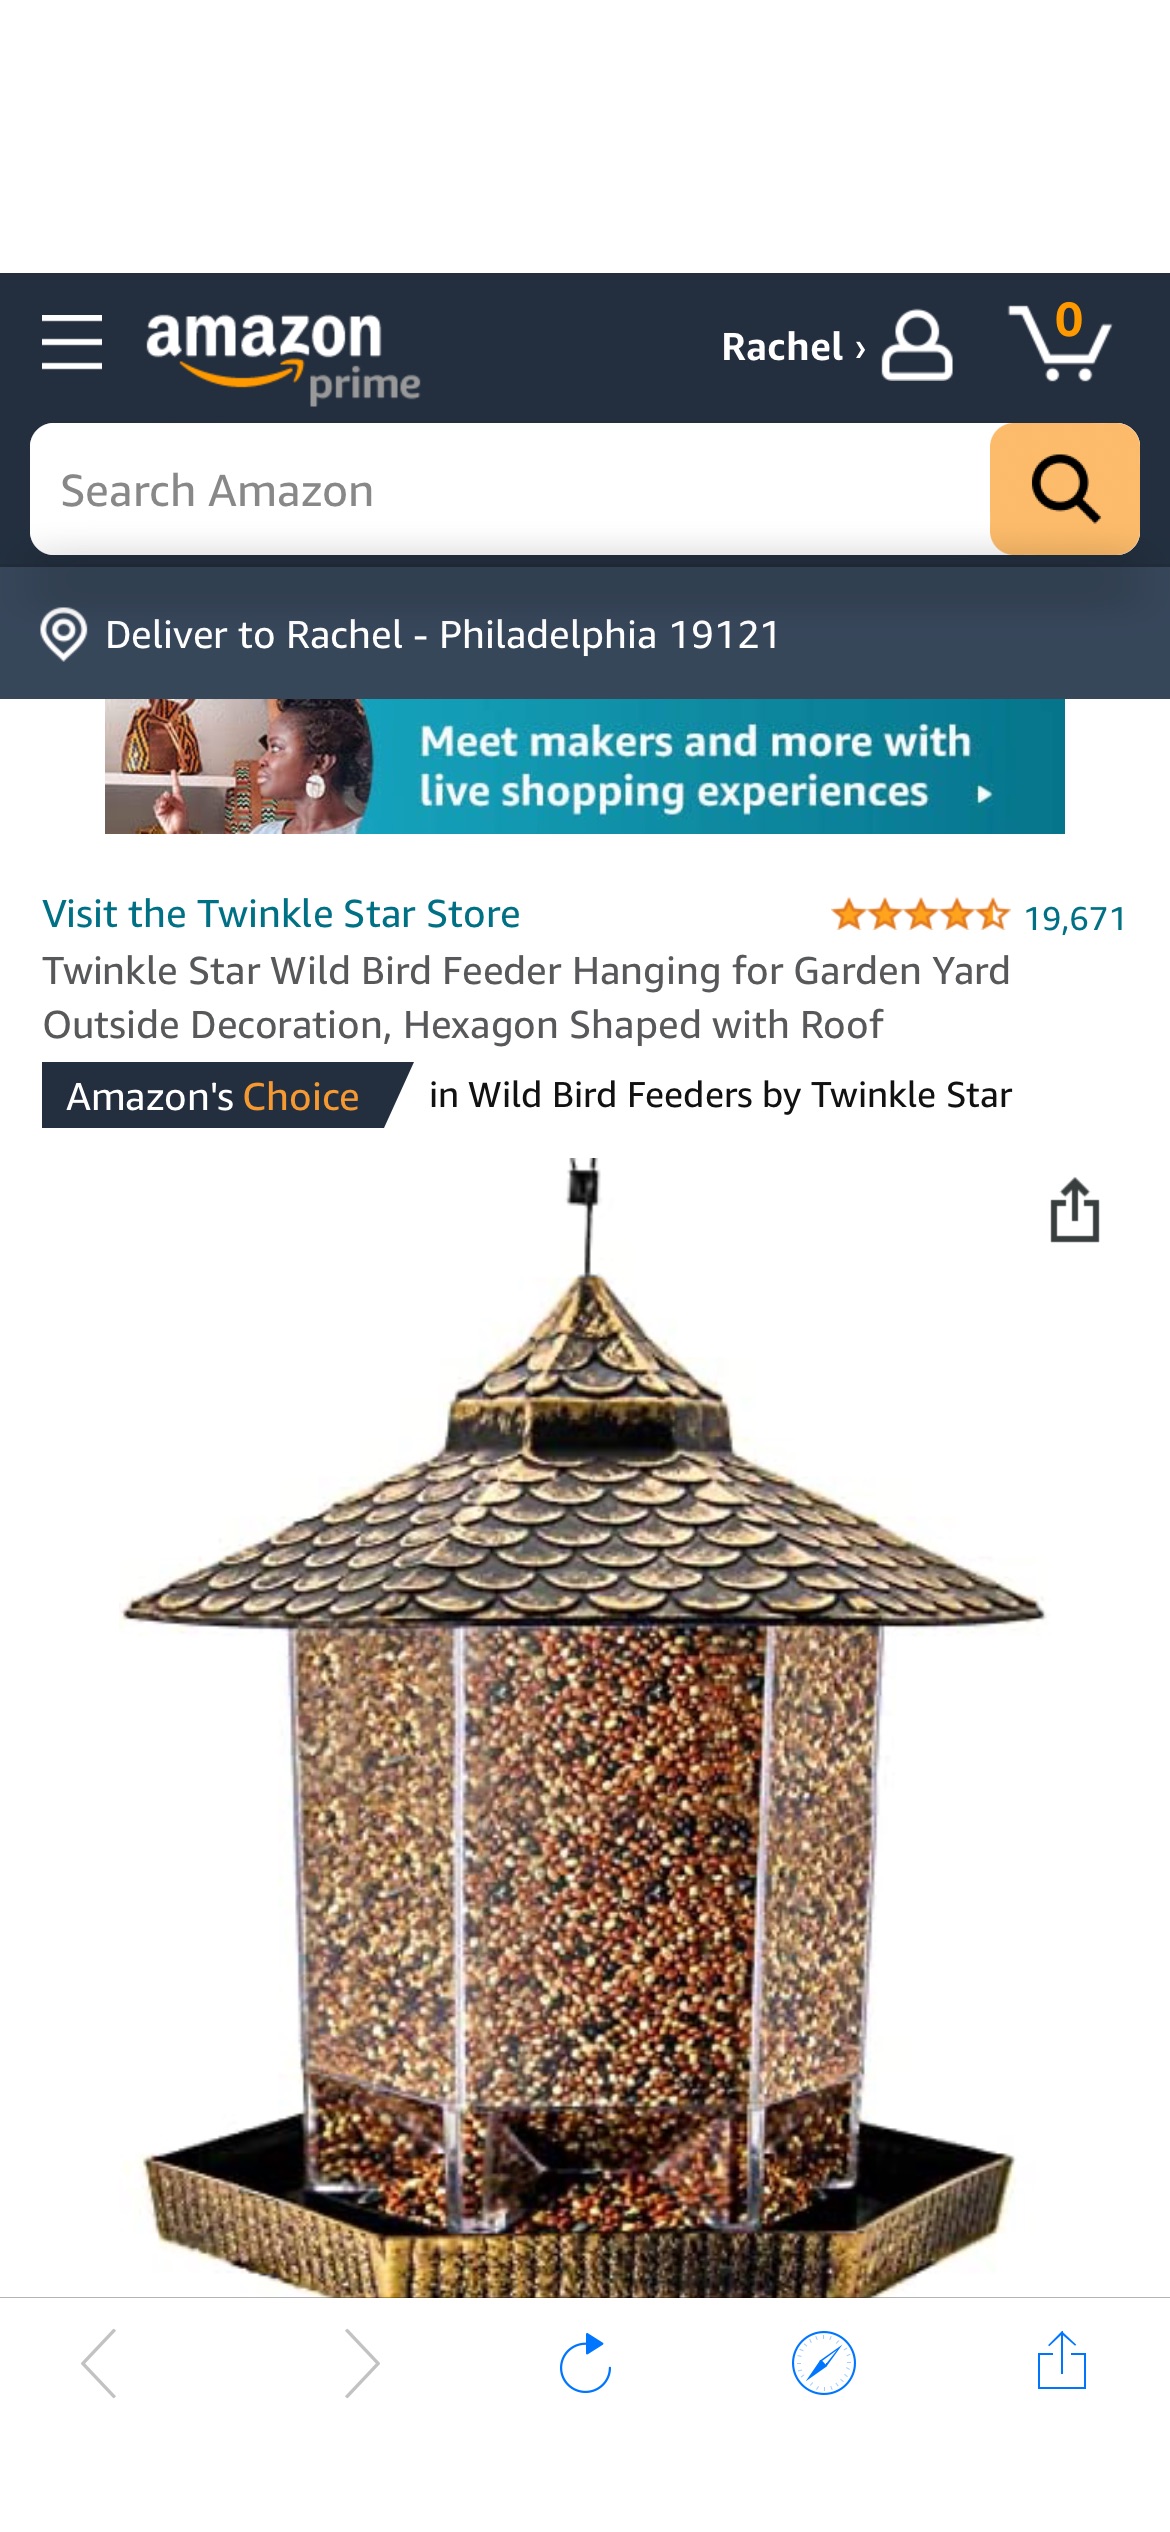 Amazon.com : Twinkle Star Wild Bird Feeder Hanging for Garden Yard Outside Decoration, Hexagon Shaped with Roof : Patio, Lawn & Garden